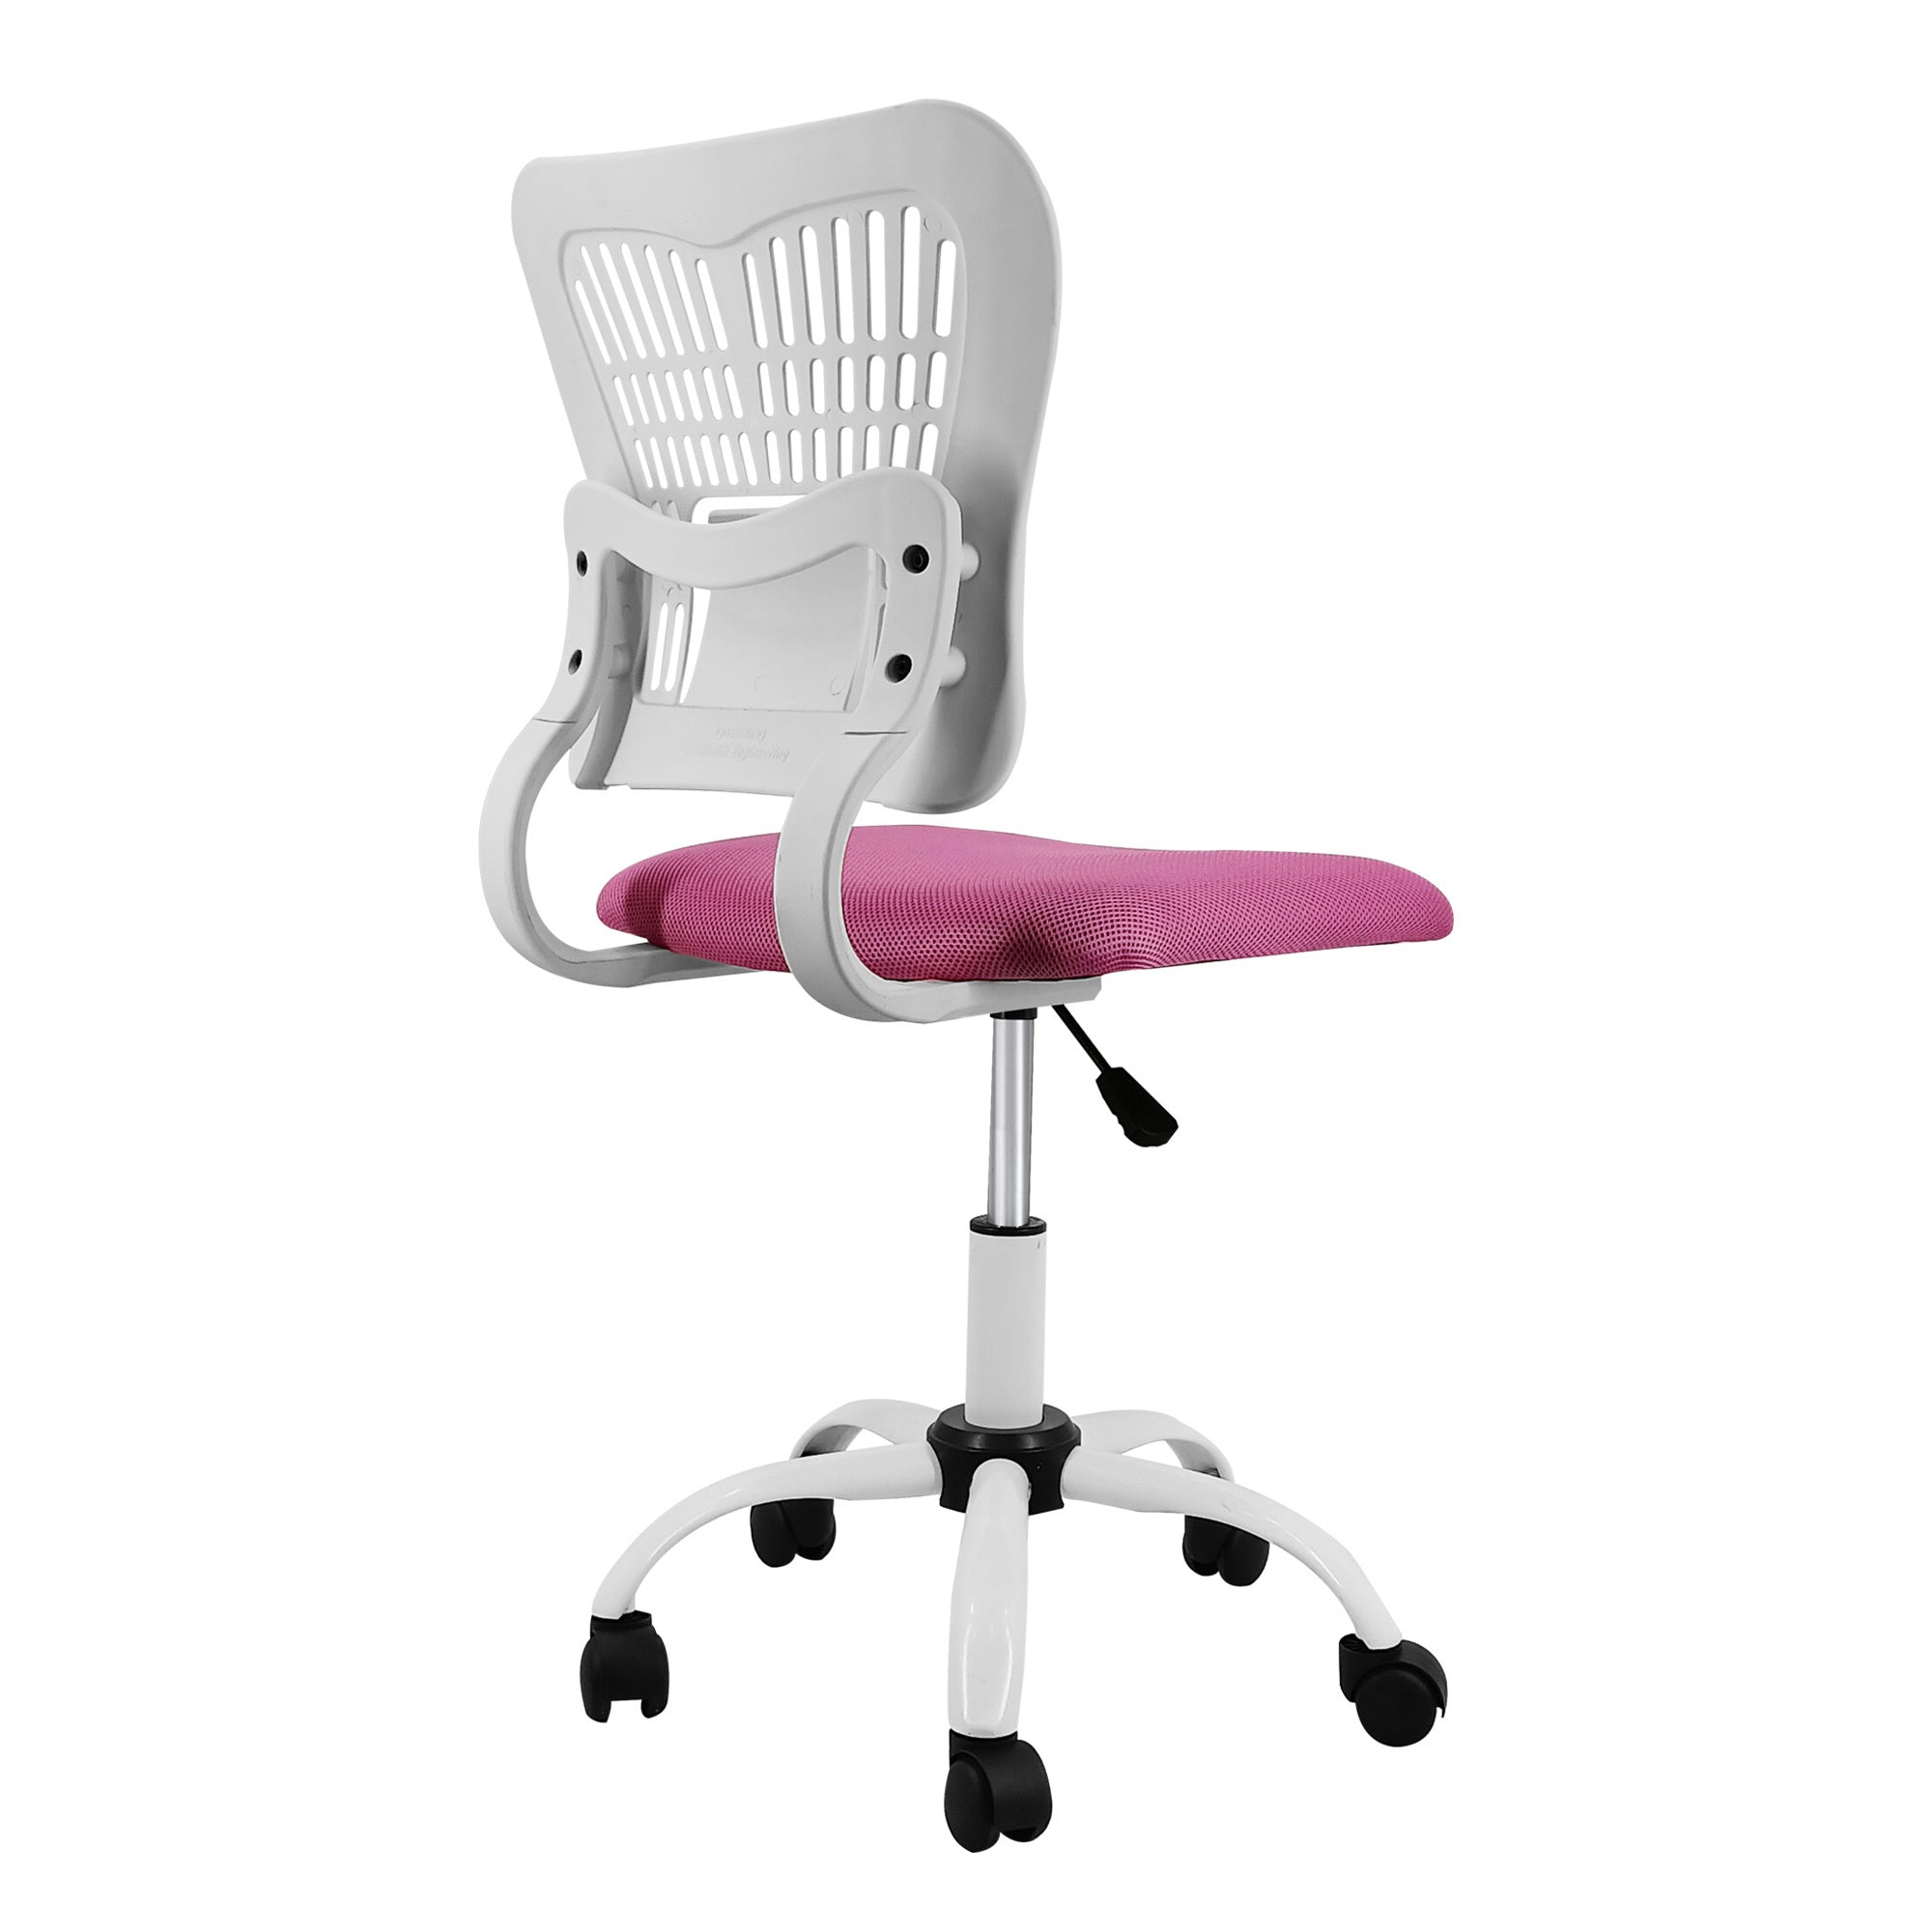 Home Office Chair Ergonomic Desk Chair Mesh Computer white+pink-fabric